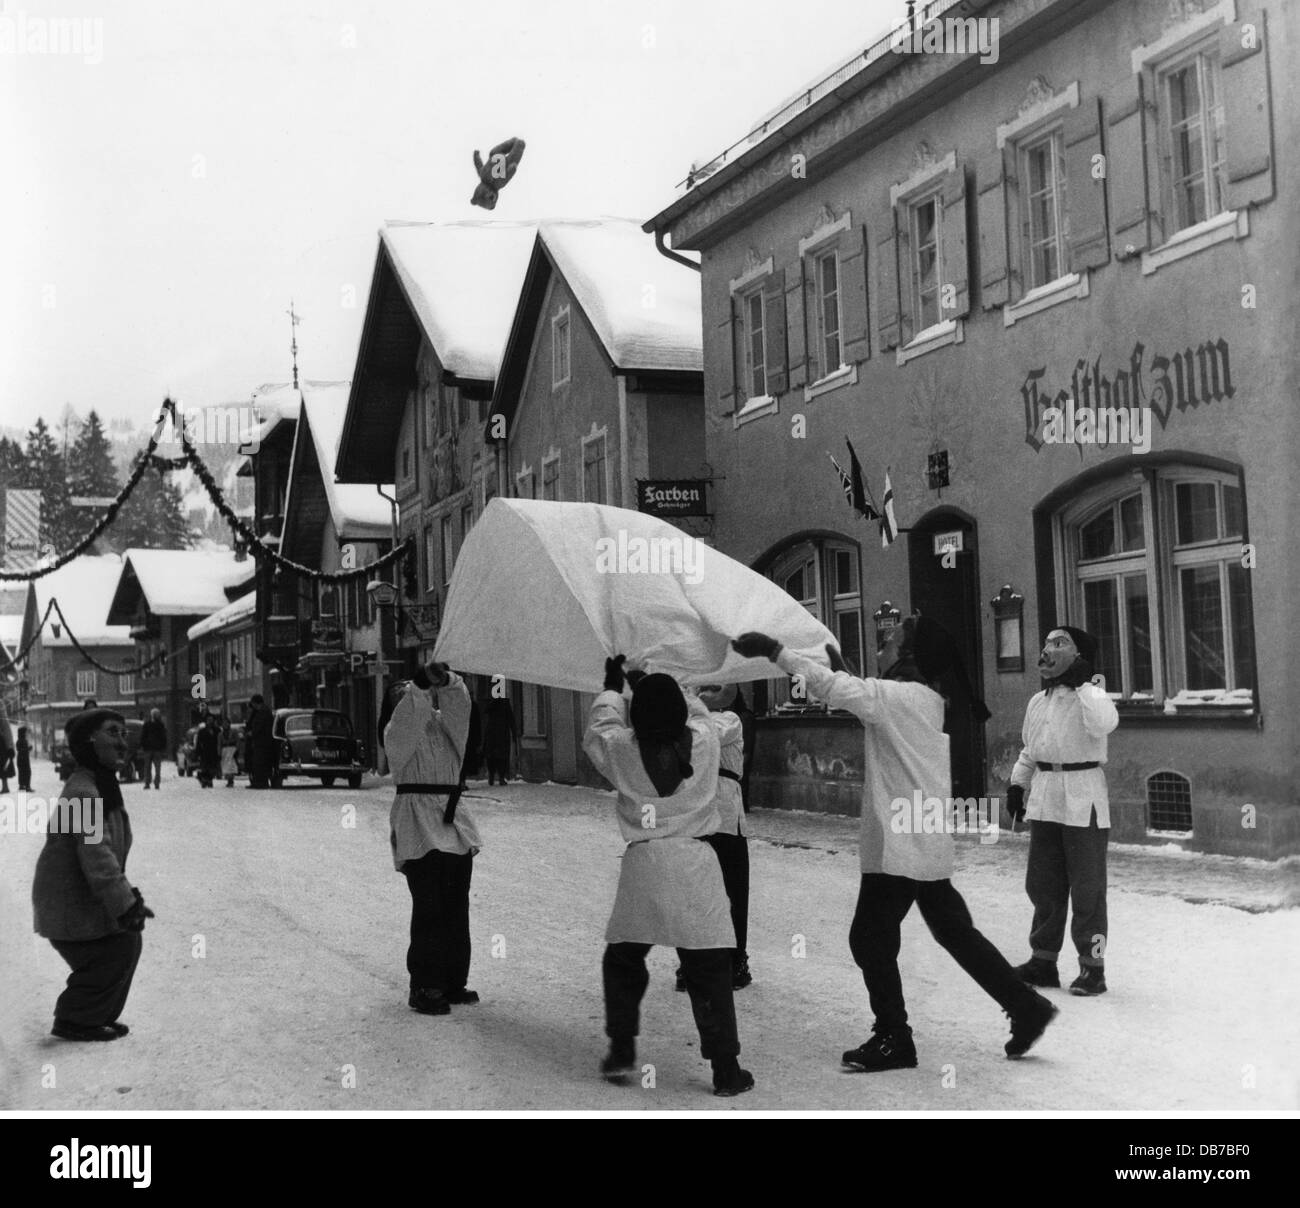 festivities, carnival at Partenkirchen, children with wooden masks throwing teddy bear with blanket in the air, Garmisch - Partenkirchen, 1956, Additional-Rights-Clearences-Not Available Stock Photo